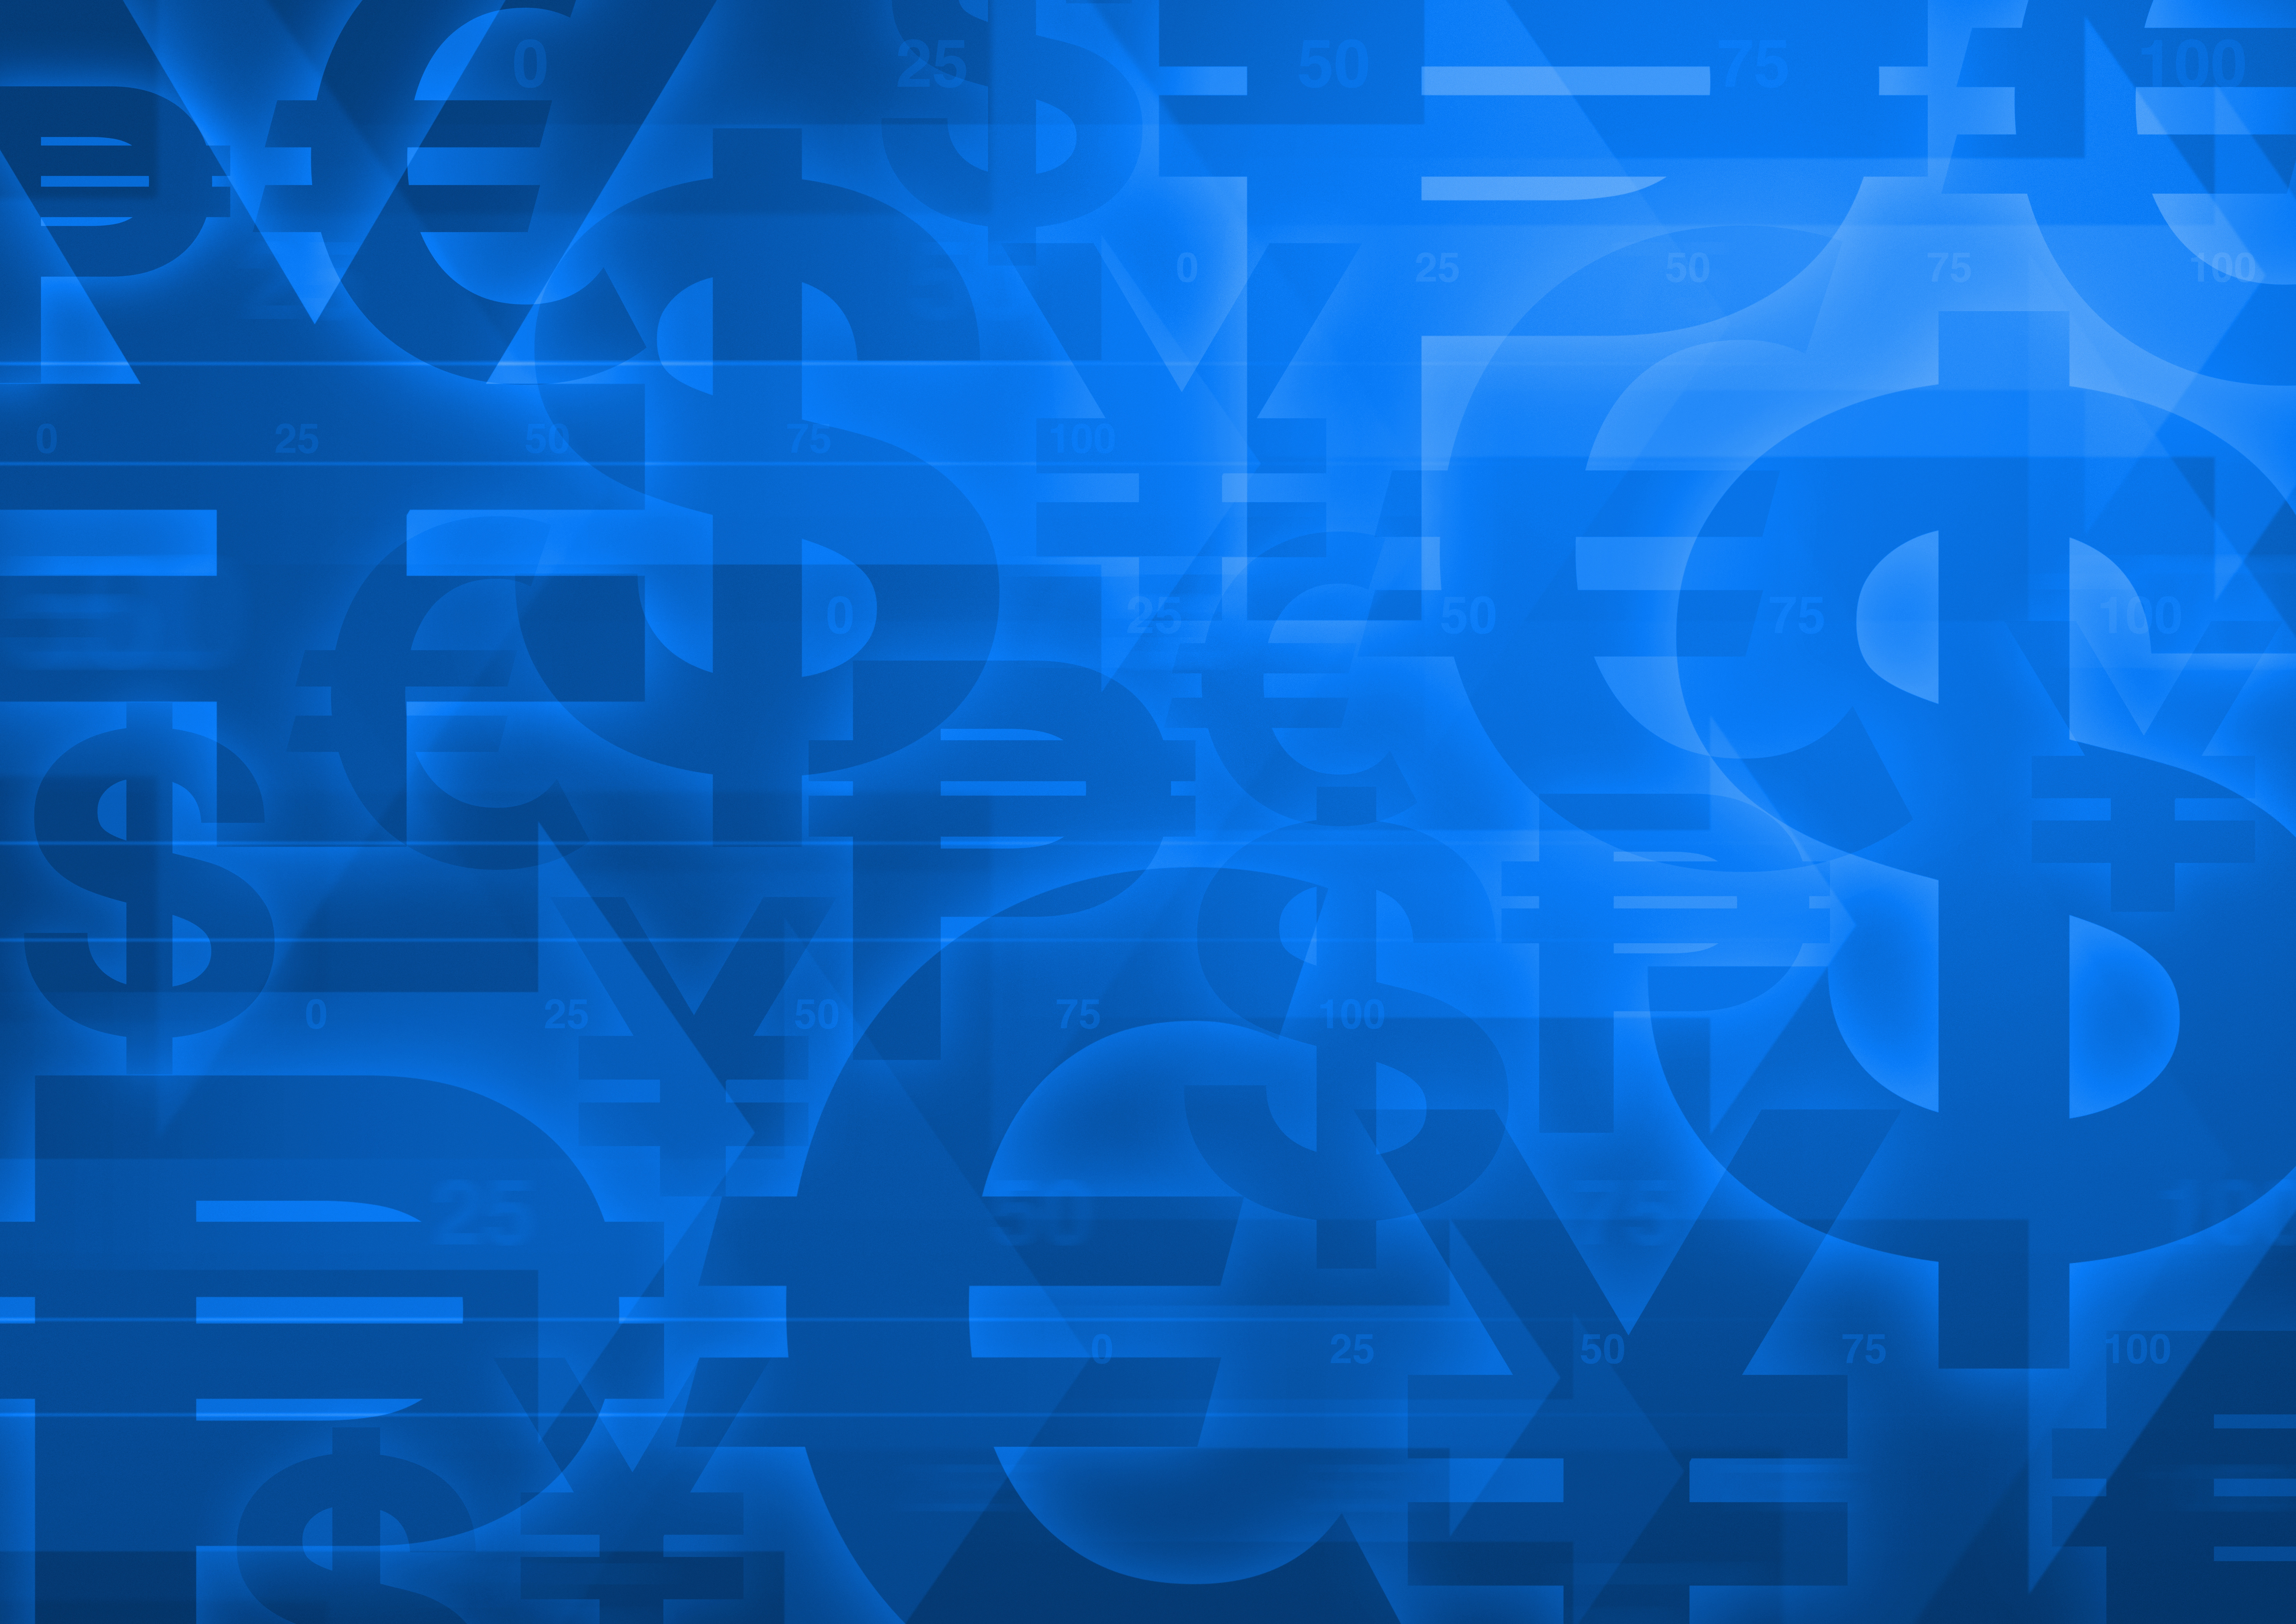 Currency symbol on bright blue for financial business background